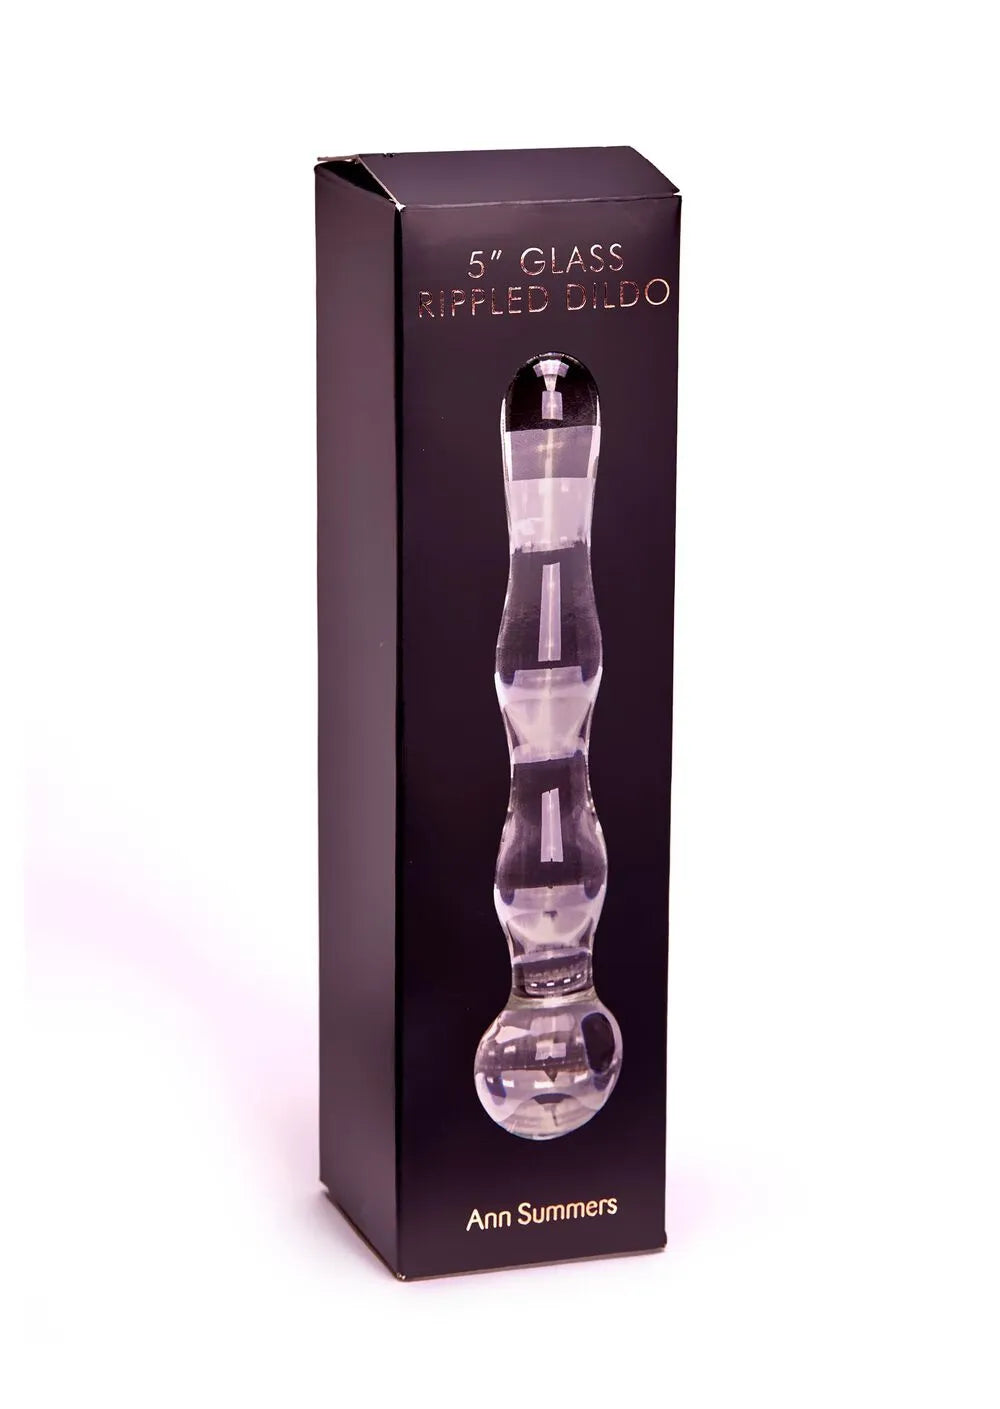 5 Inch Glass Rippled Dildo From Ann Summers, Image 4